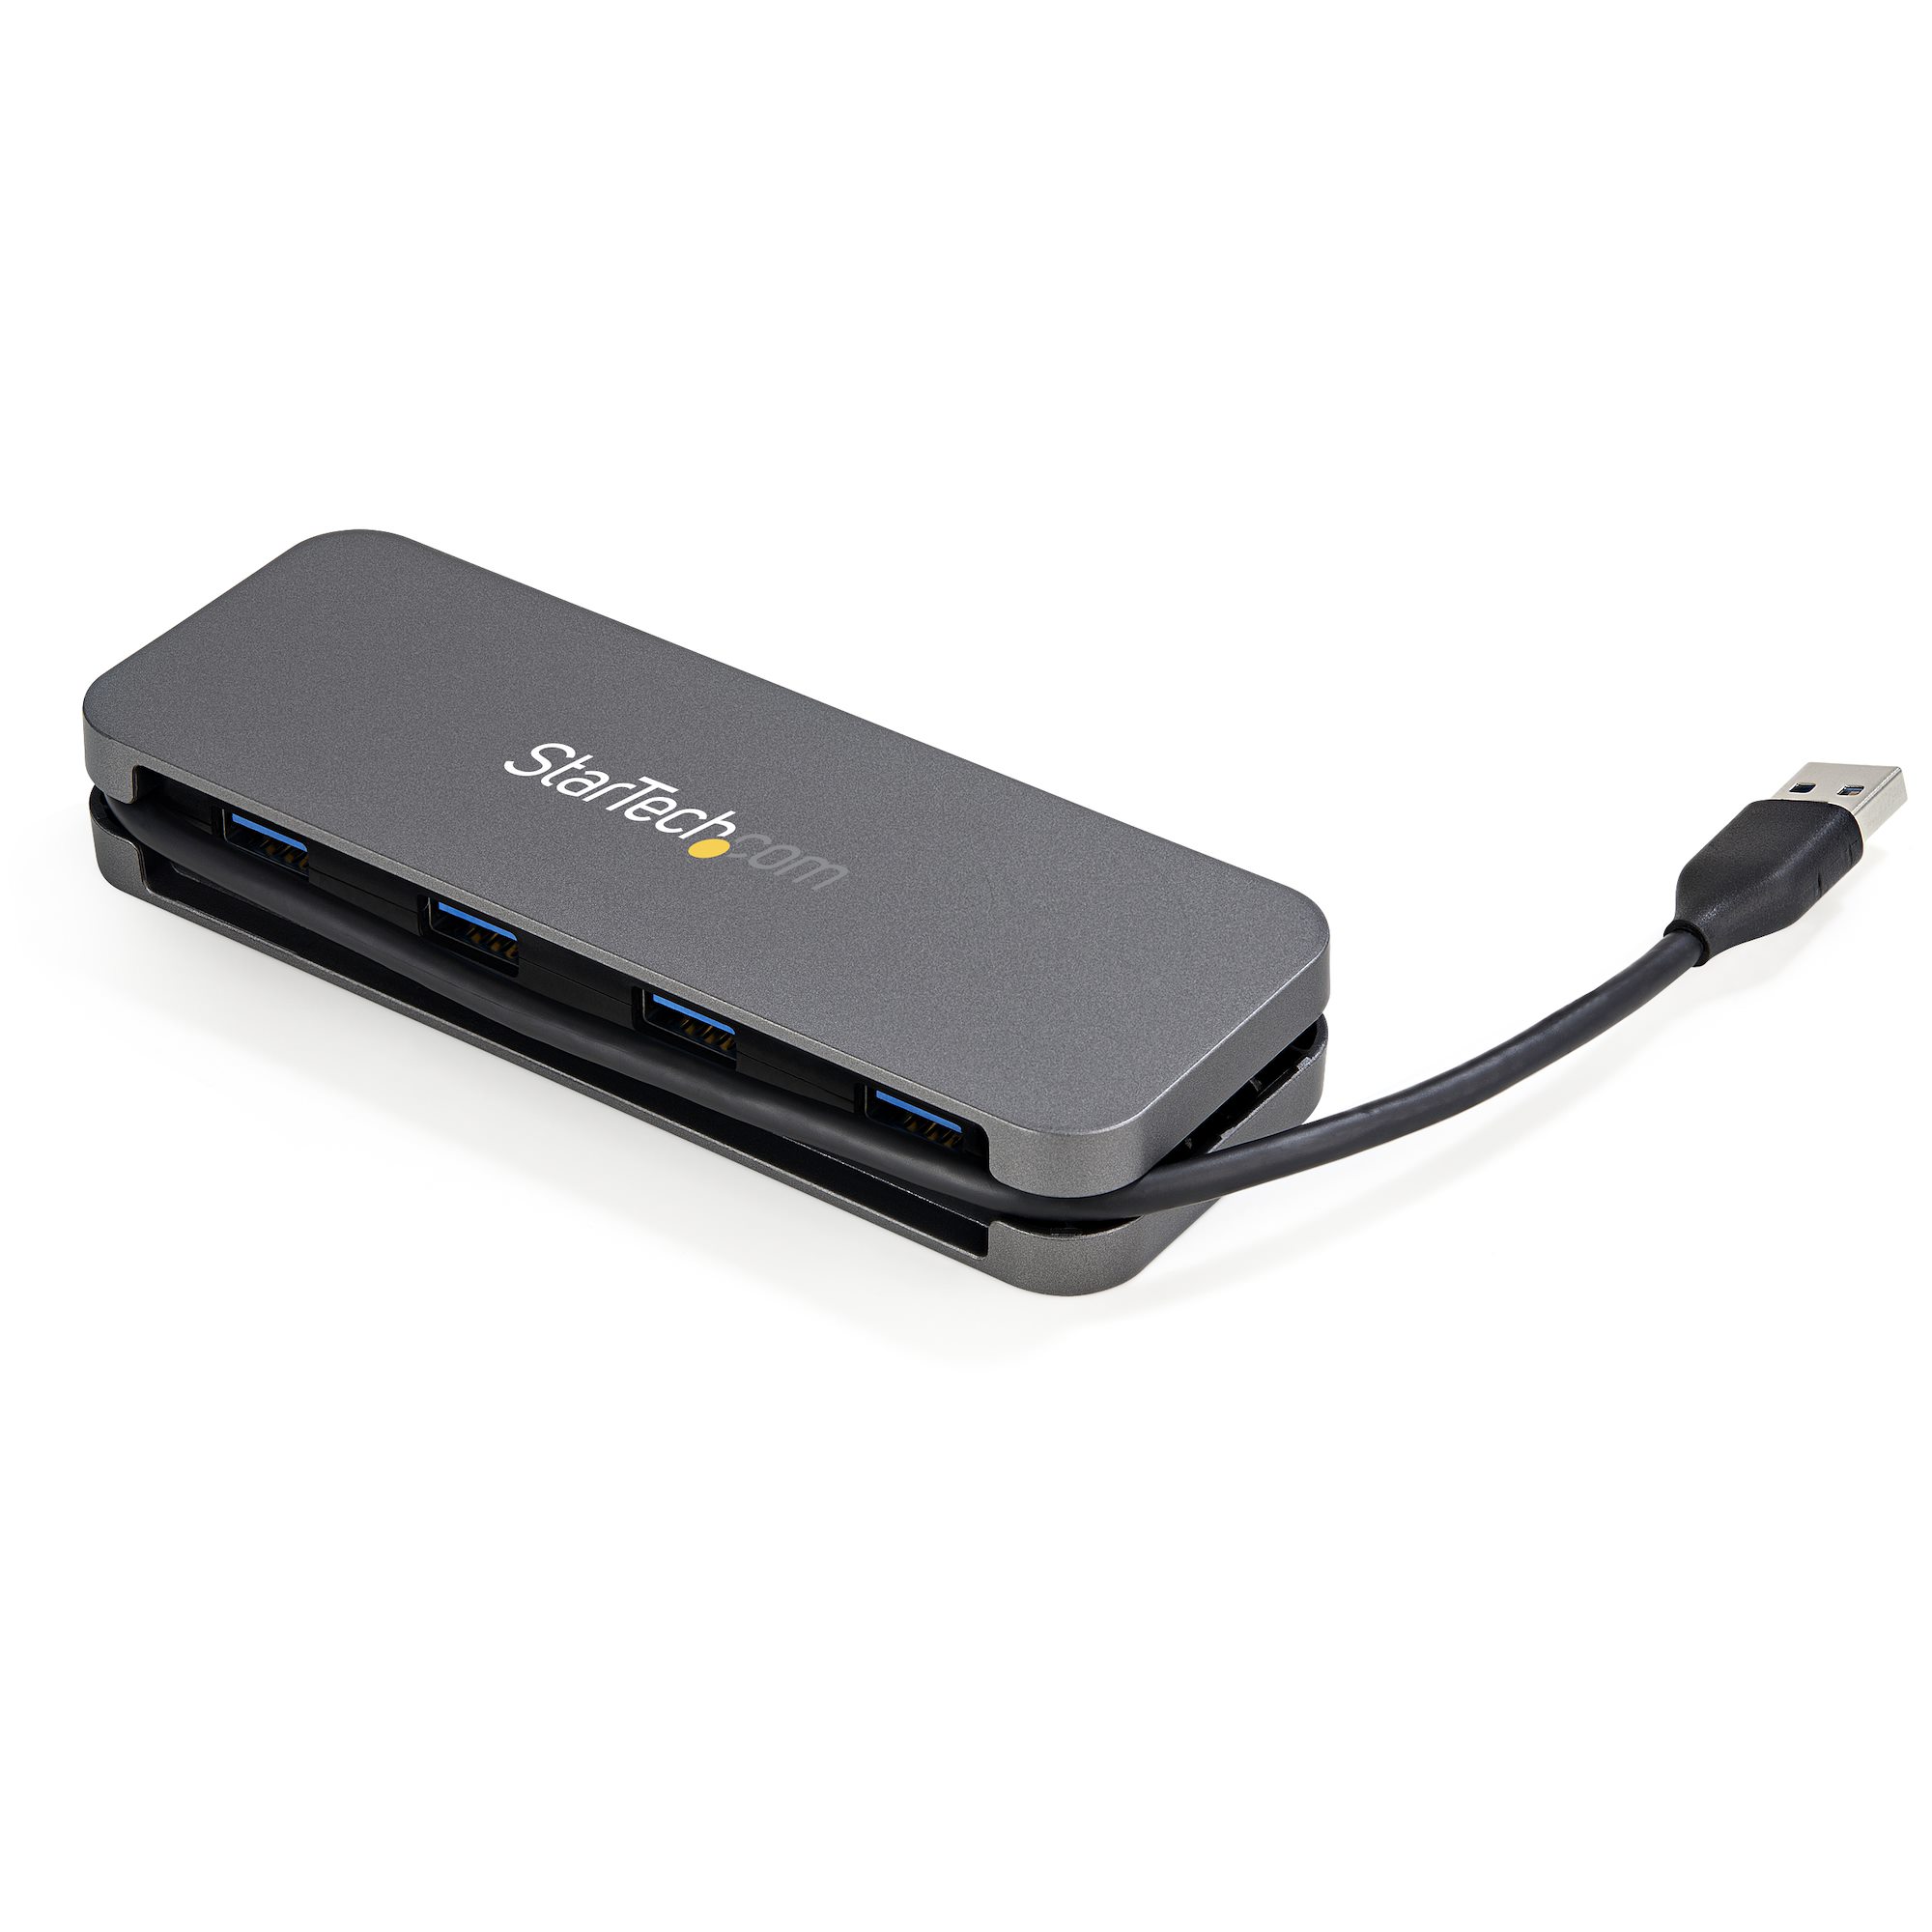 4-port StarTech.com 4 Port Portable USB 3.0 Hub with Built-in